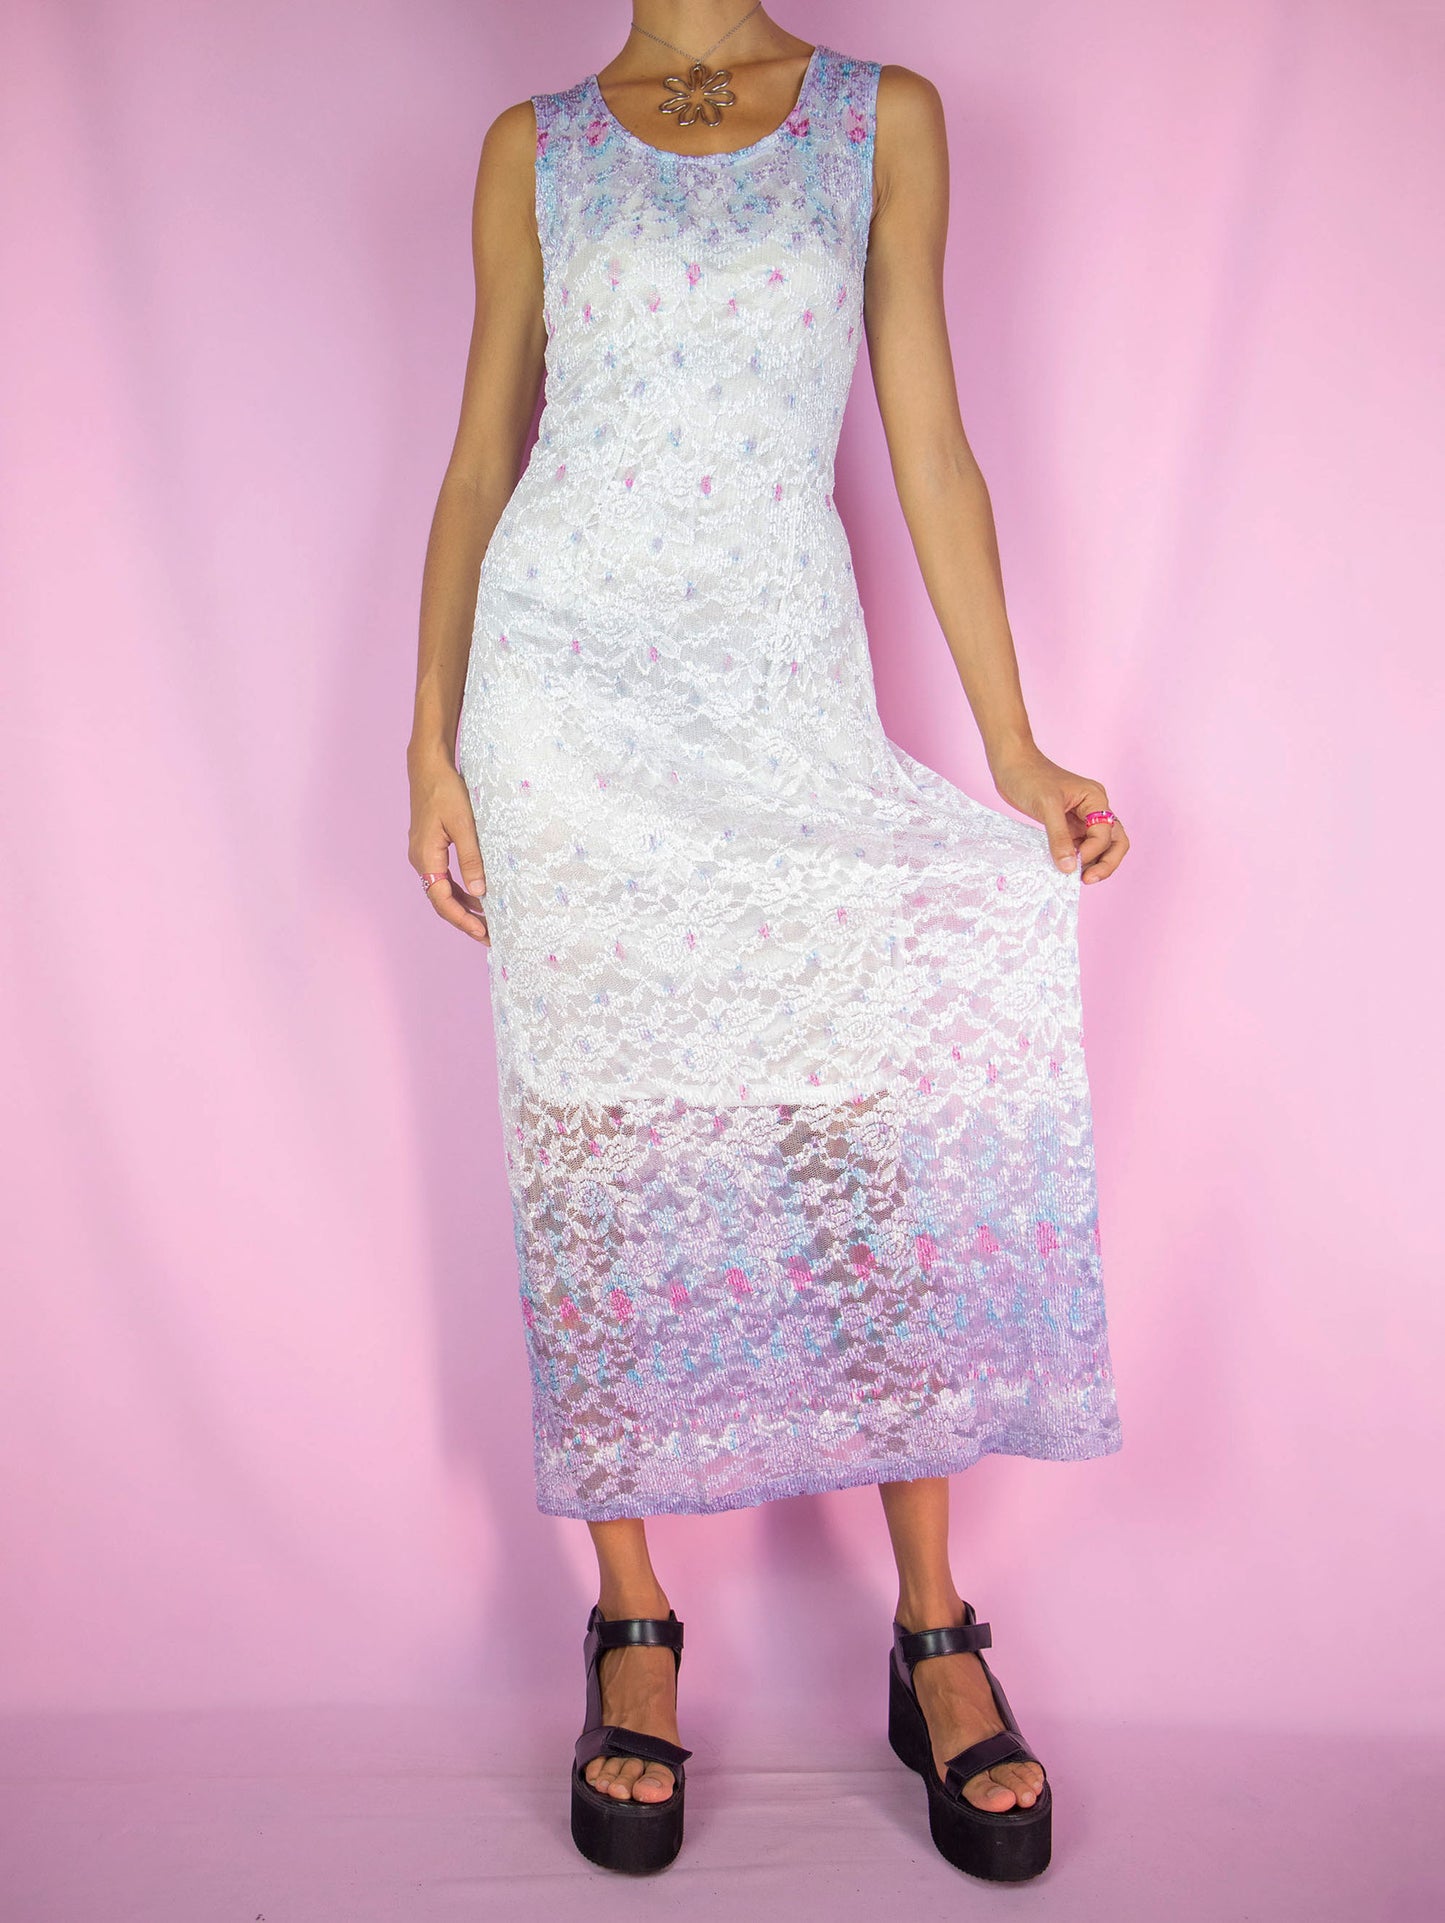 The Y2K White Lace Maxi Dress is a vintage sleeveless semi-sheer mesh lace white lilac multicolored dress that is tied at the back. Romantic summer party 2000s midi dress.